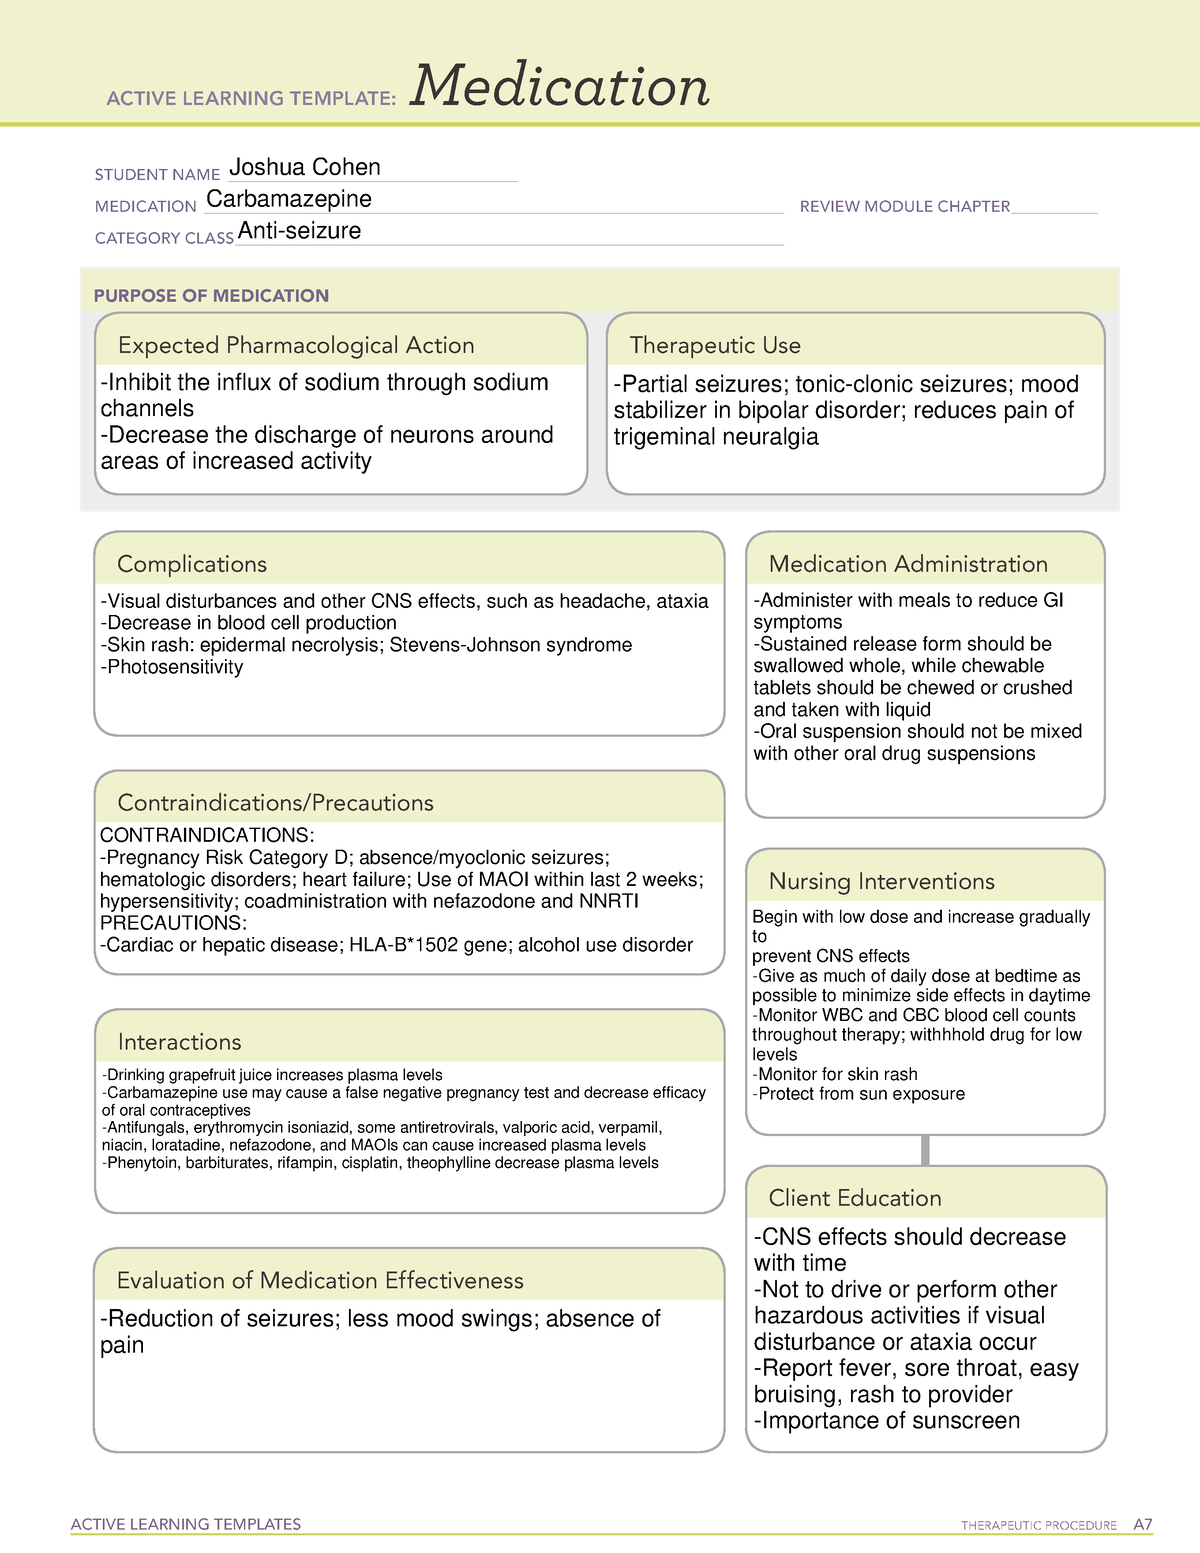 Carbamazepine Drug template ACTIVE LEARNING TEMPLATES THERAPEUTIC